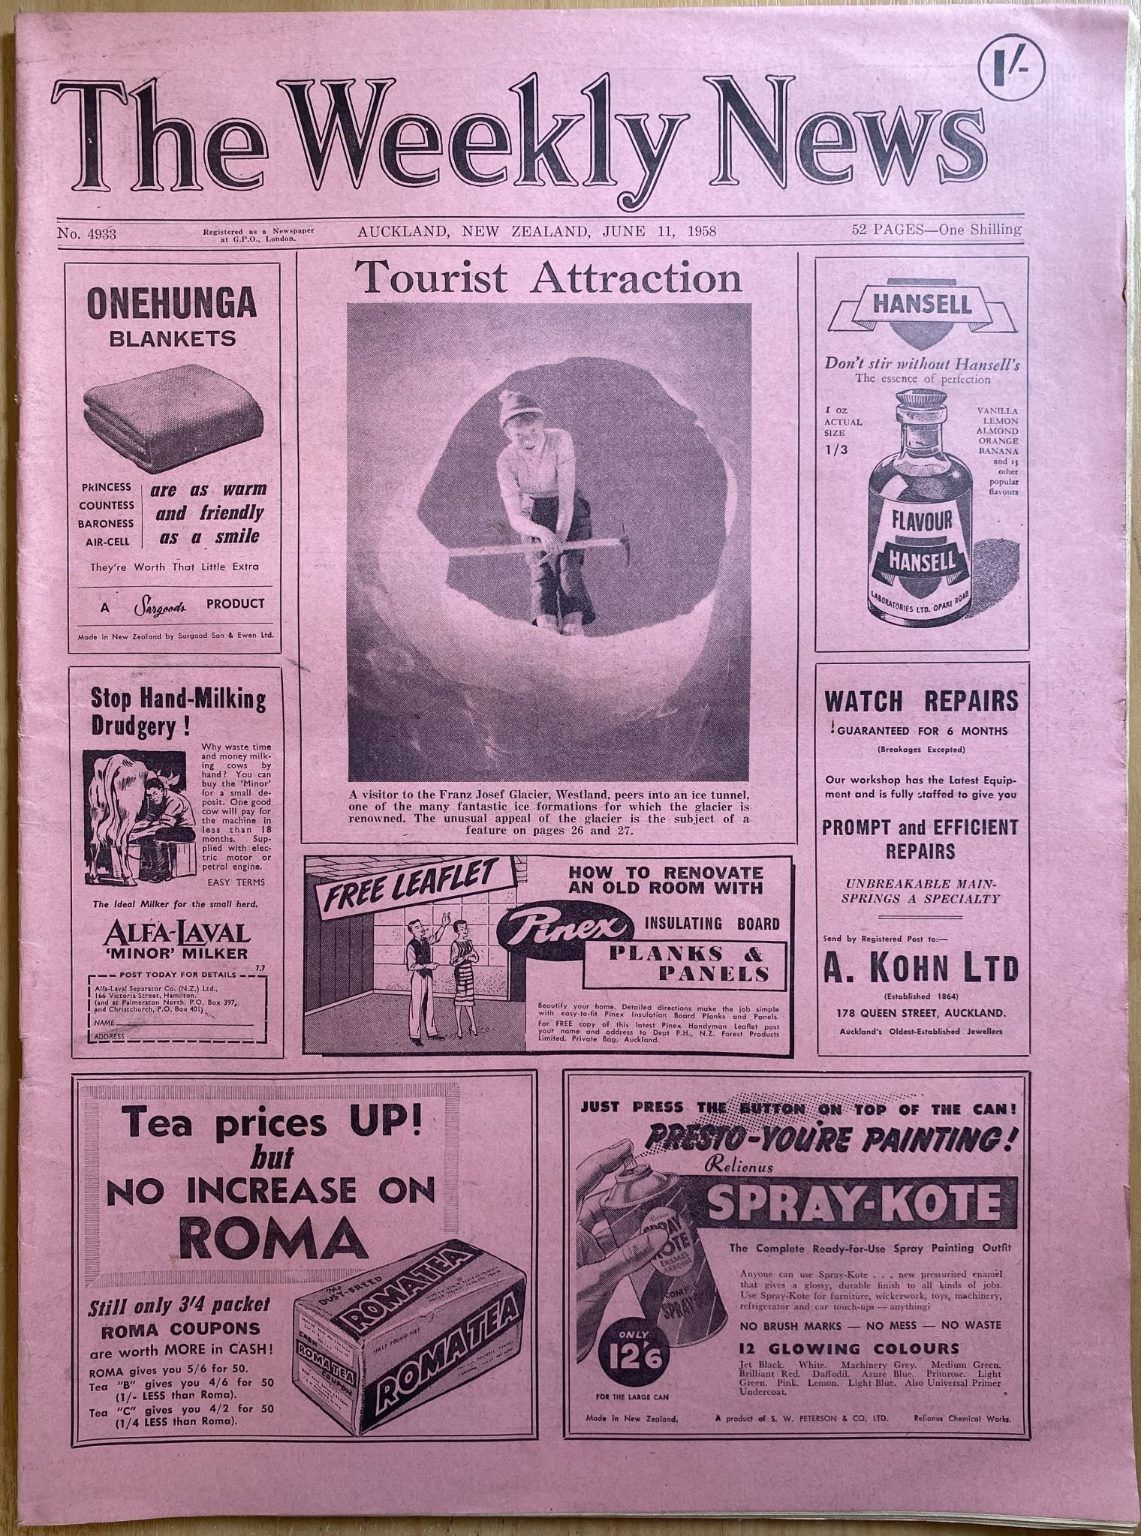 OLD NEWSPAPER: The Weekly News, No. 4933, 11 June 1958